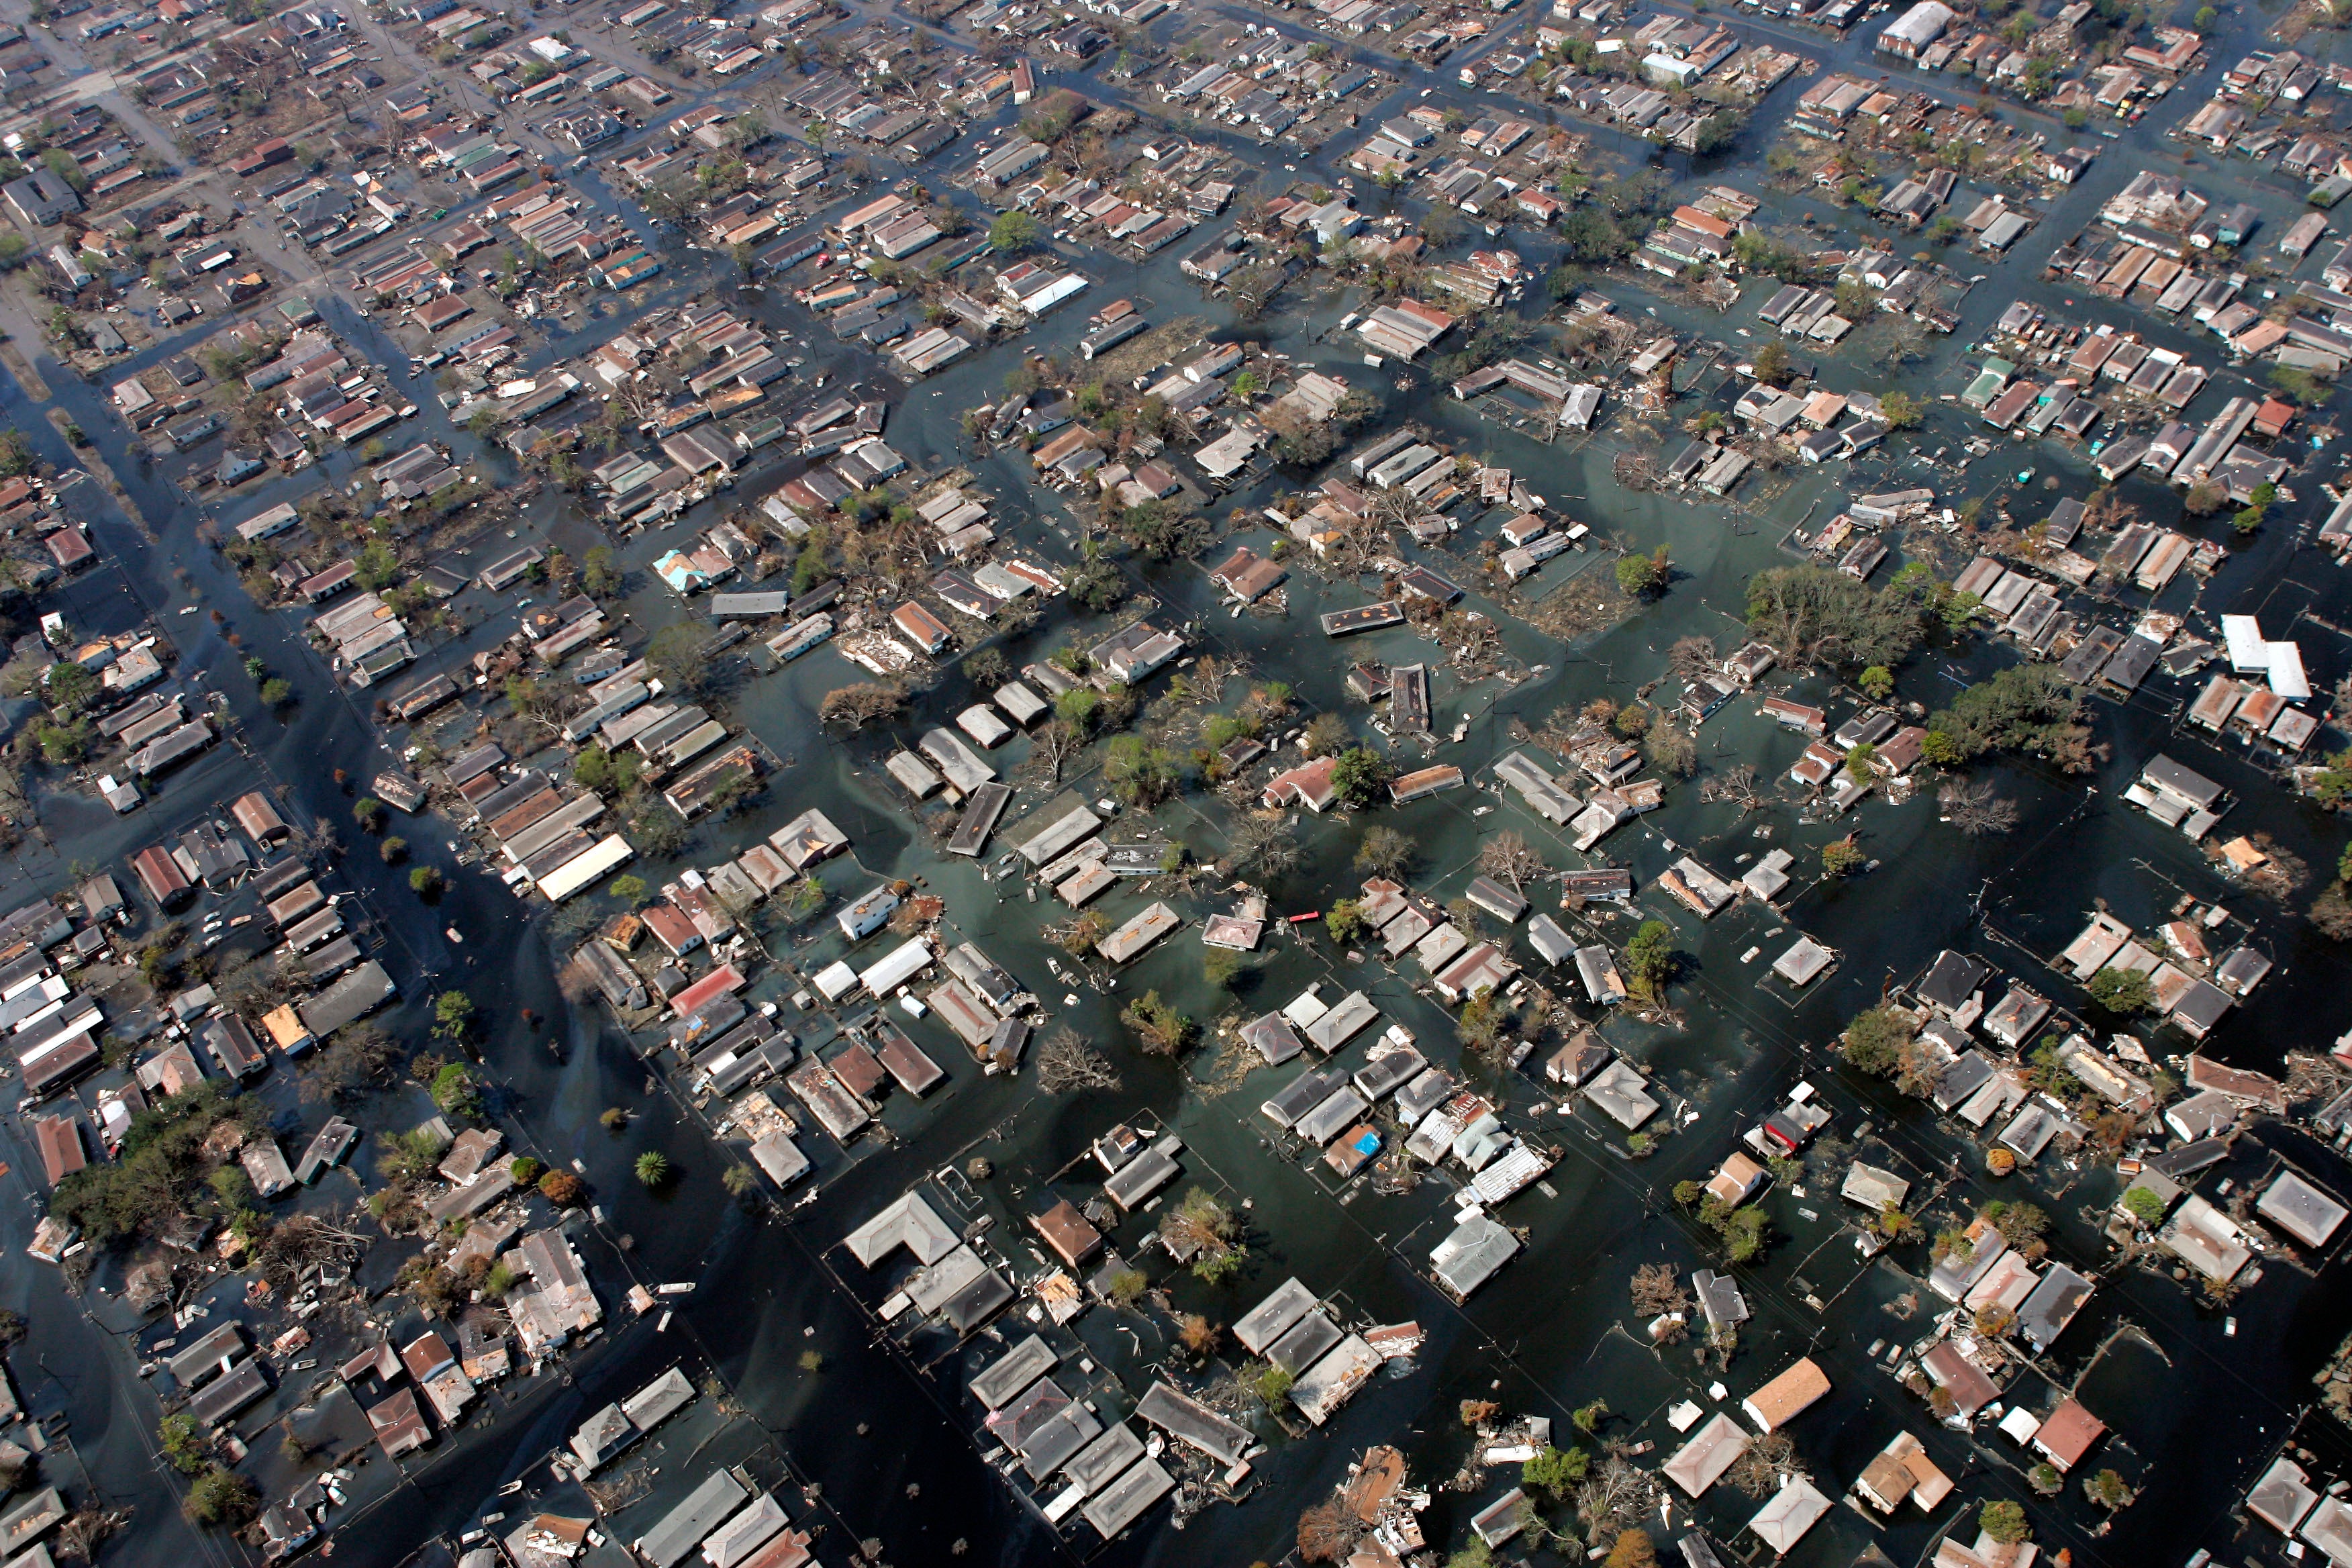 Homes remain surrounded by floodwaters in the aftermath of Hurricane Katrina on Sept. 11, 2005, in New Orleans